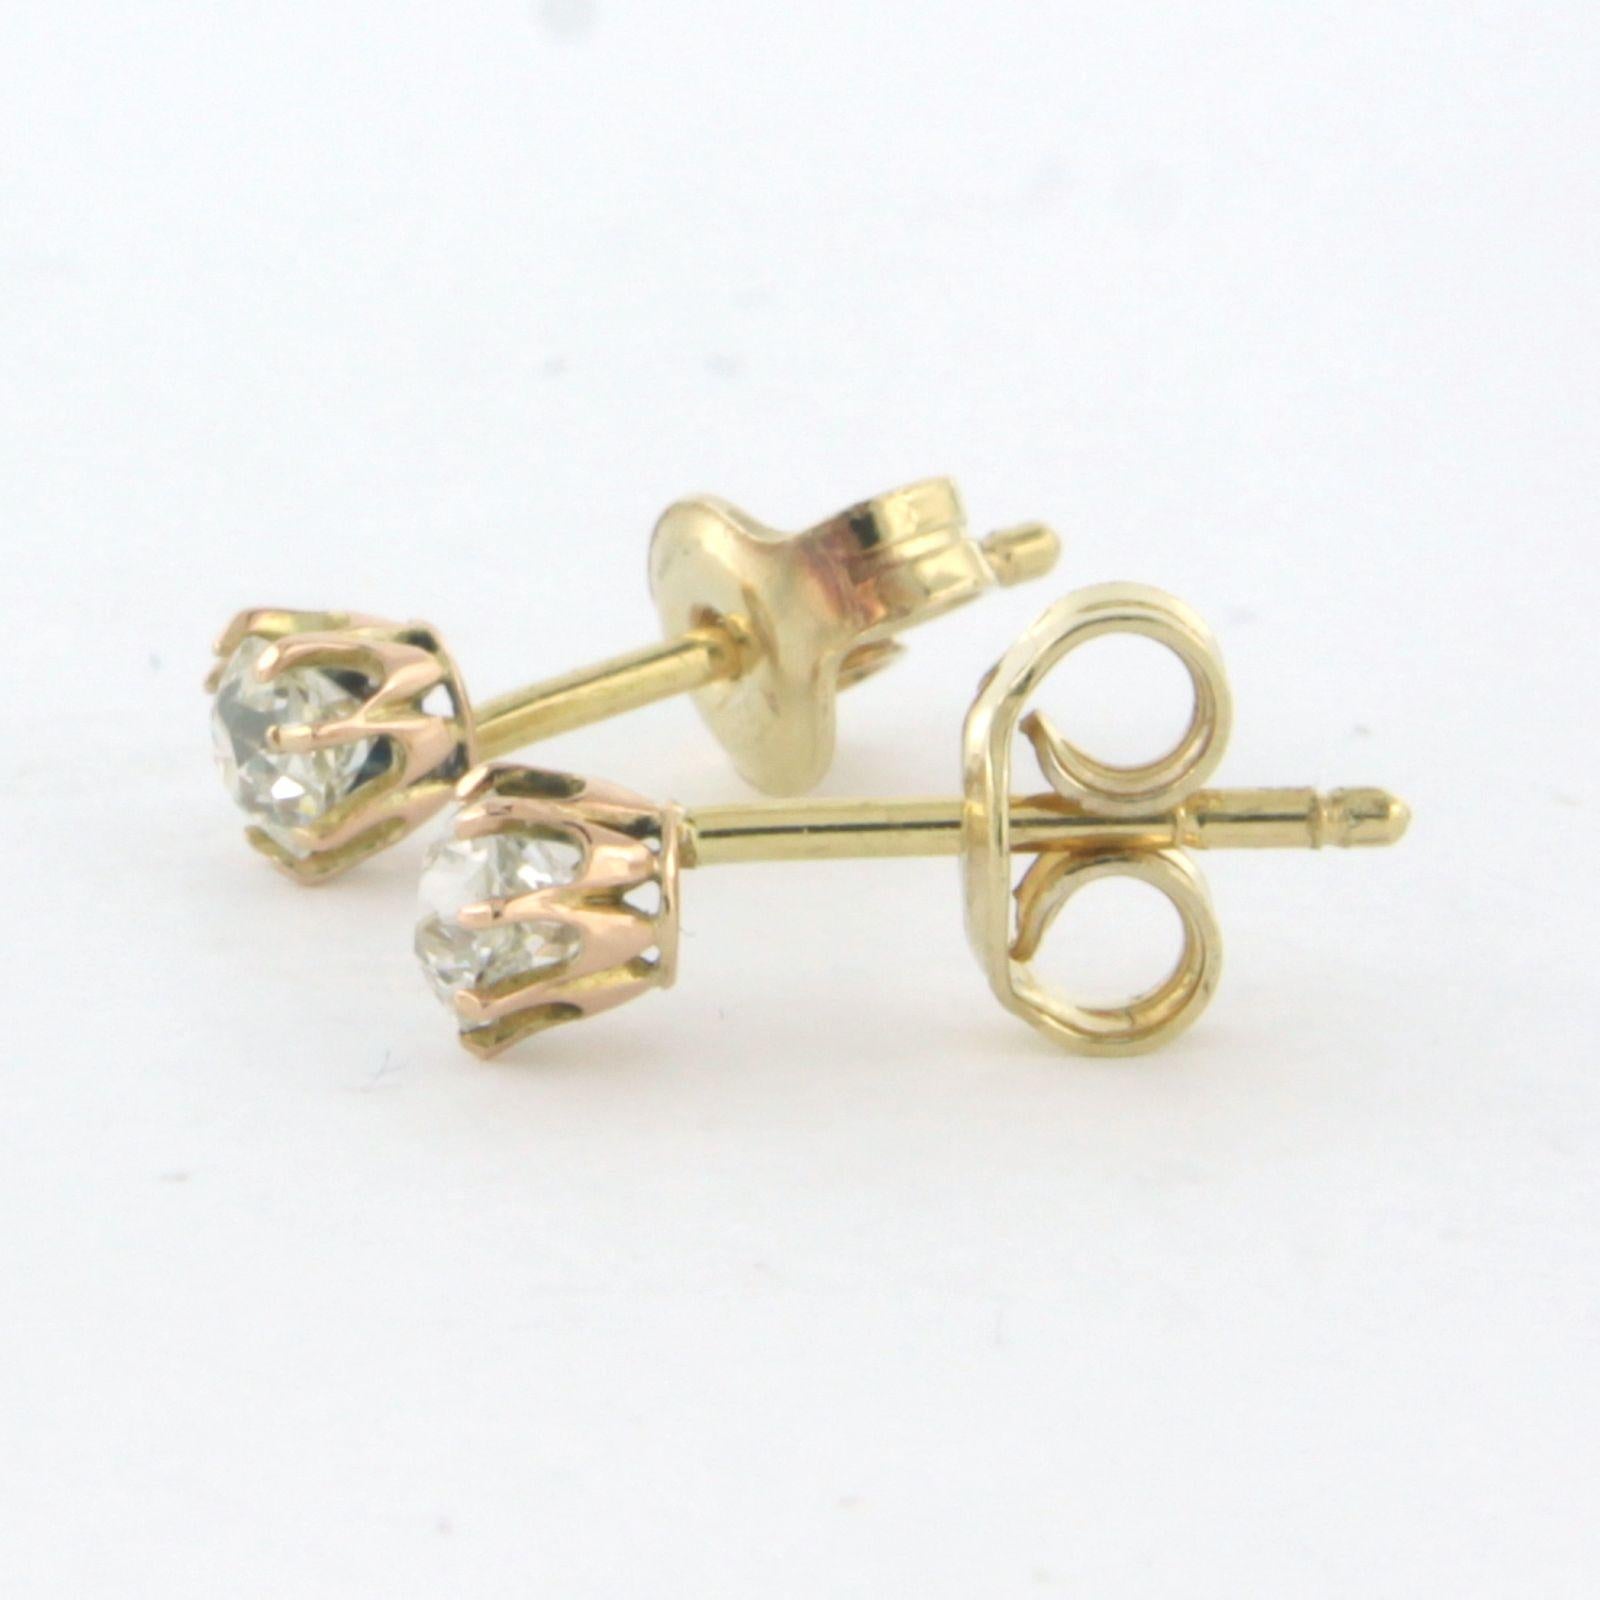 18k yellow gold solitaire ear studs with old mine cut diamond up to. 0.36ct – G/H – SI

Detailed description:

the size of the ear stud is 4.1 mm wide

Total weight 1.0 grams

set with

- 2 x 3.4 mm old mine cut diamond, approximately 0.36 carats in